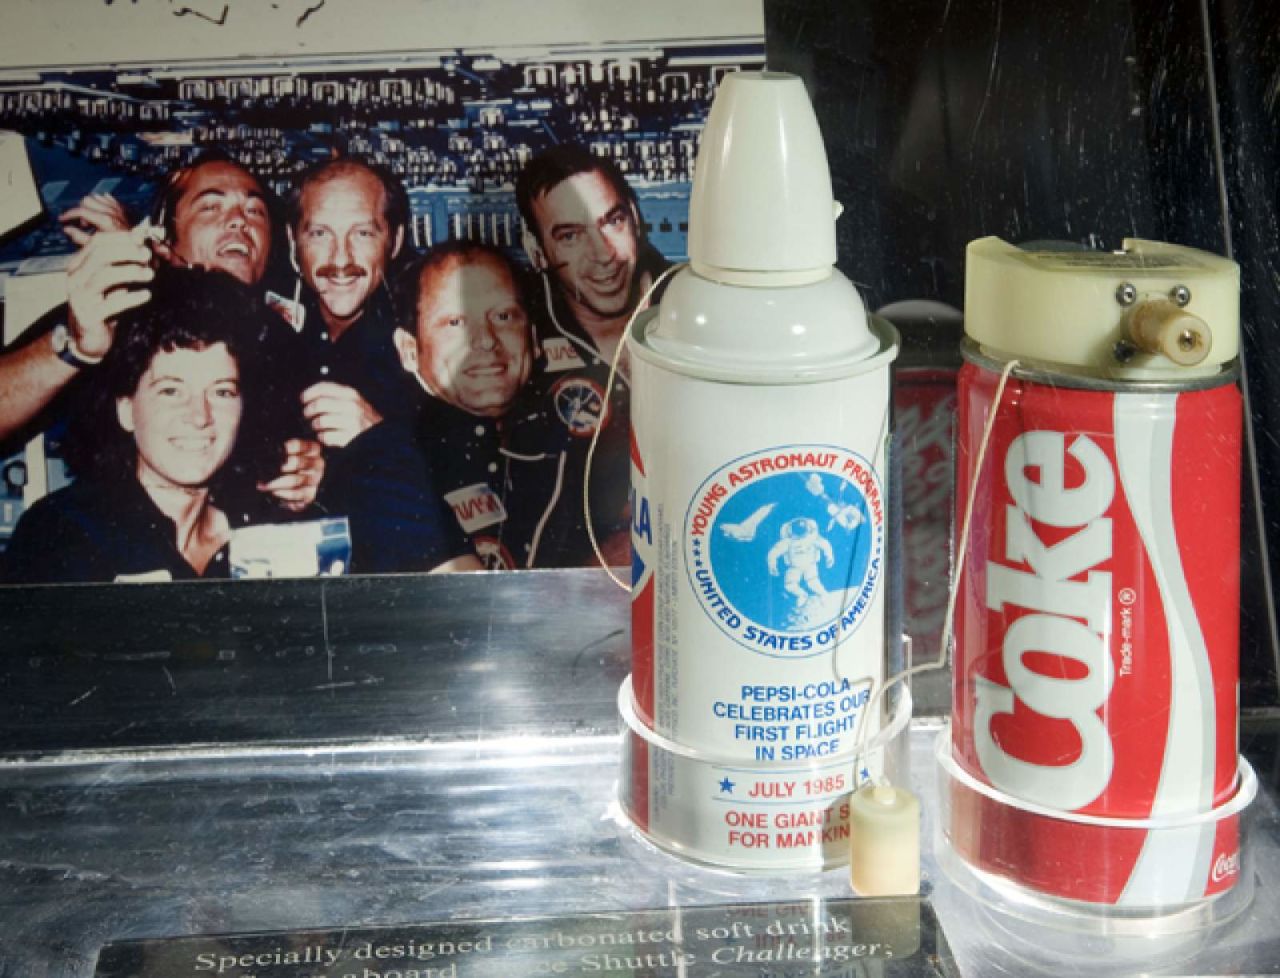 In the mid '80s, Coca-Cola and Pepsi went head to head to be the first cola in space. Each company developed its own can that could dispense soda in microgravity -- no small feat considering bubbles don't rise in space. In 1985, Space Shuttle Challenger took with it both products. The crew was unimpressed by drinking the room temperature colas.